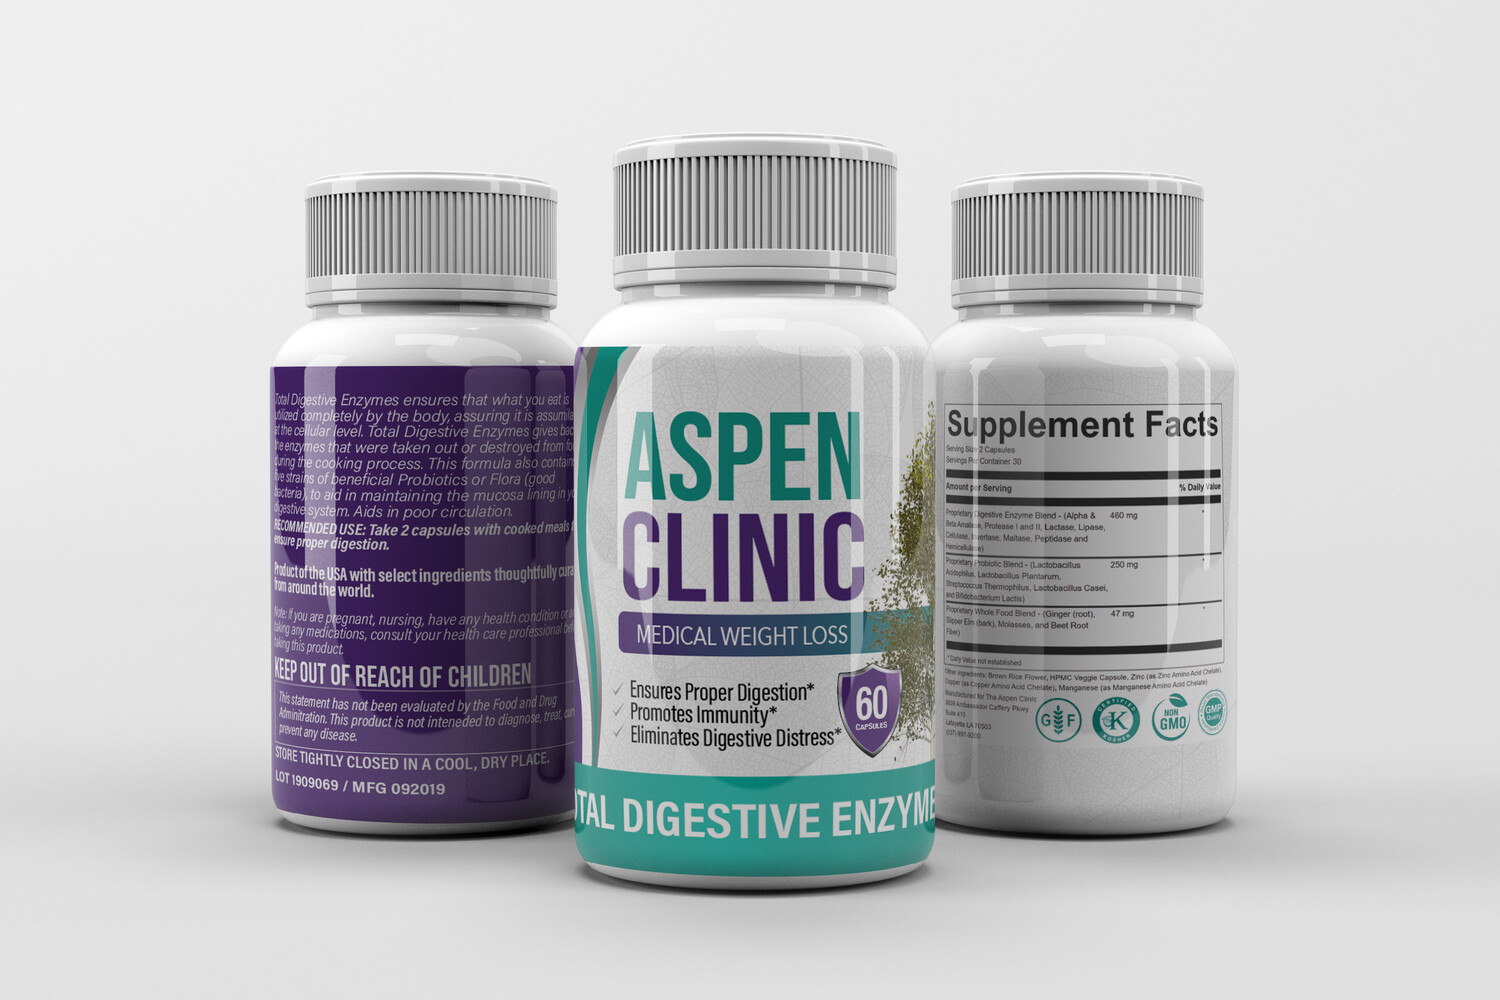 Total Digestive Enzymes